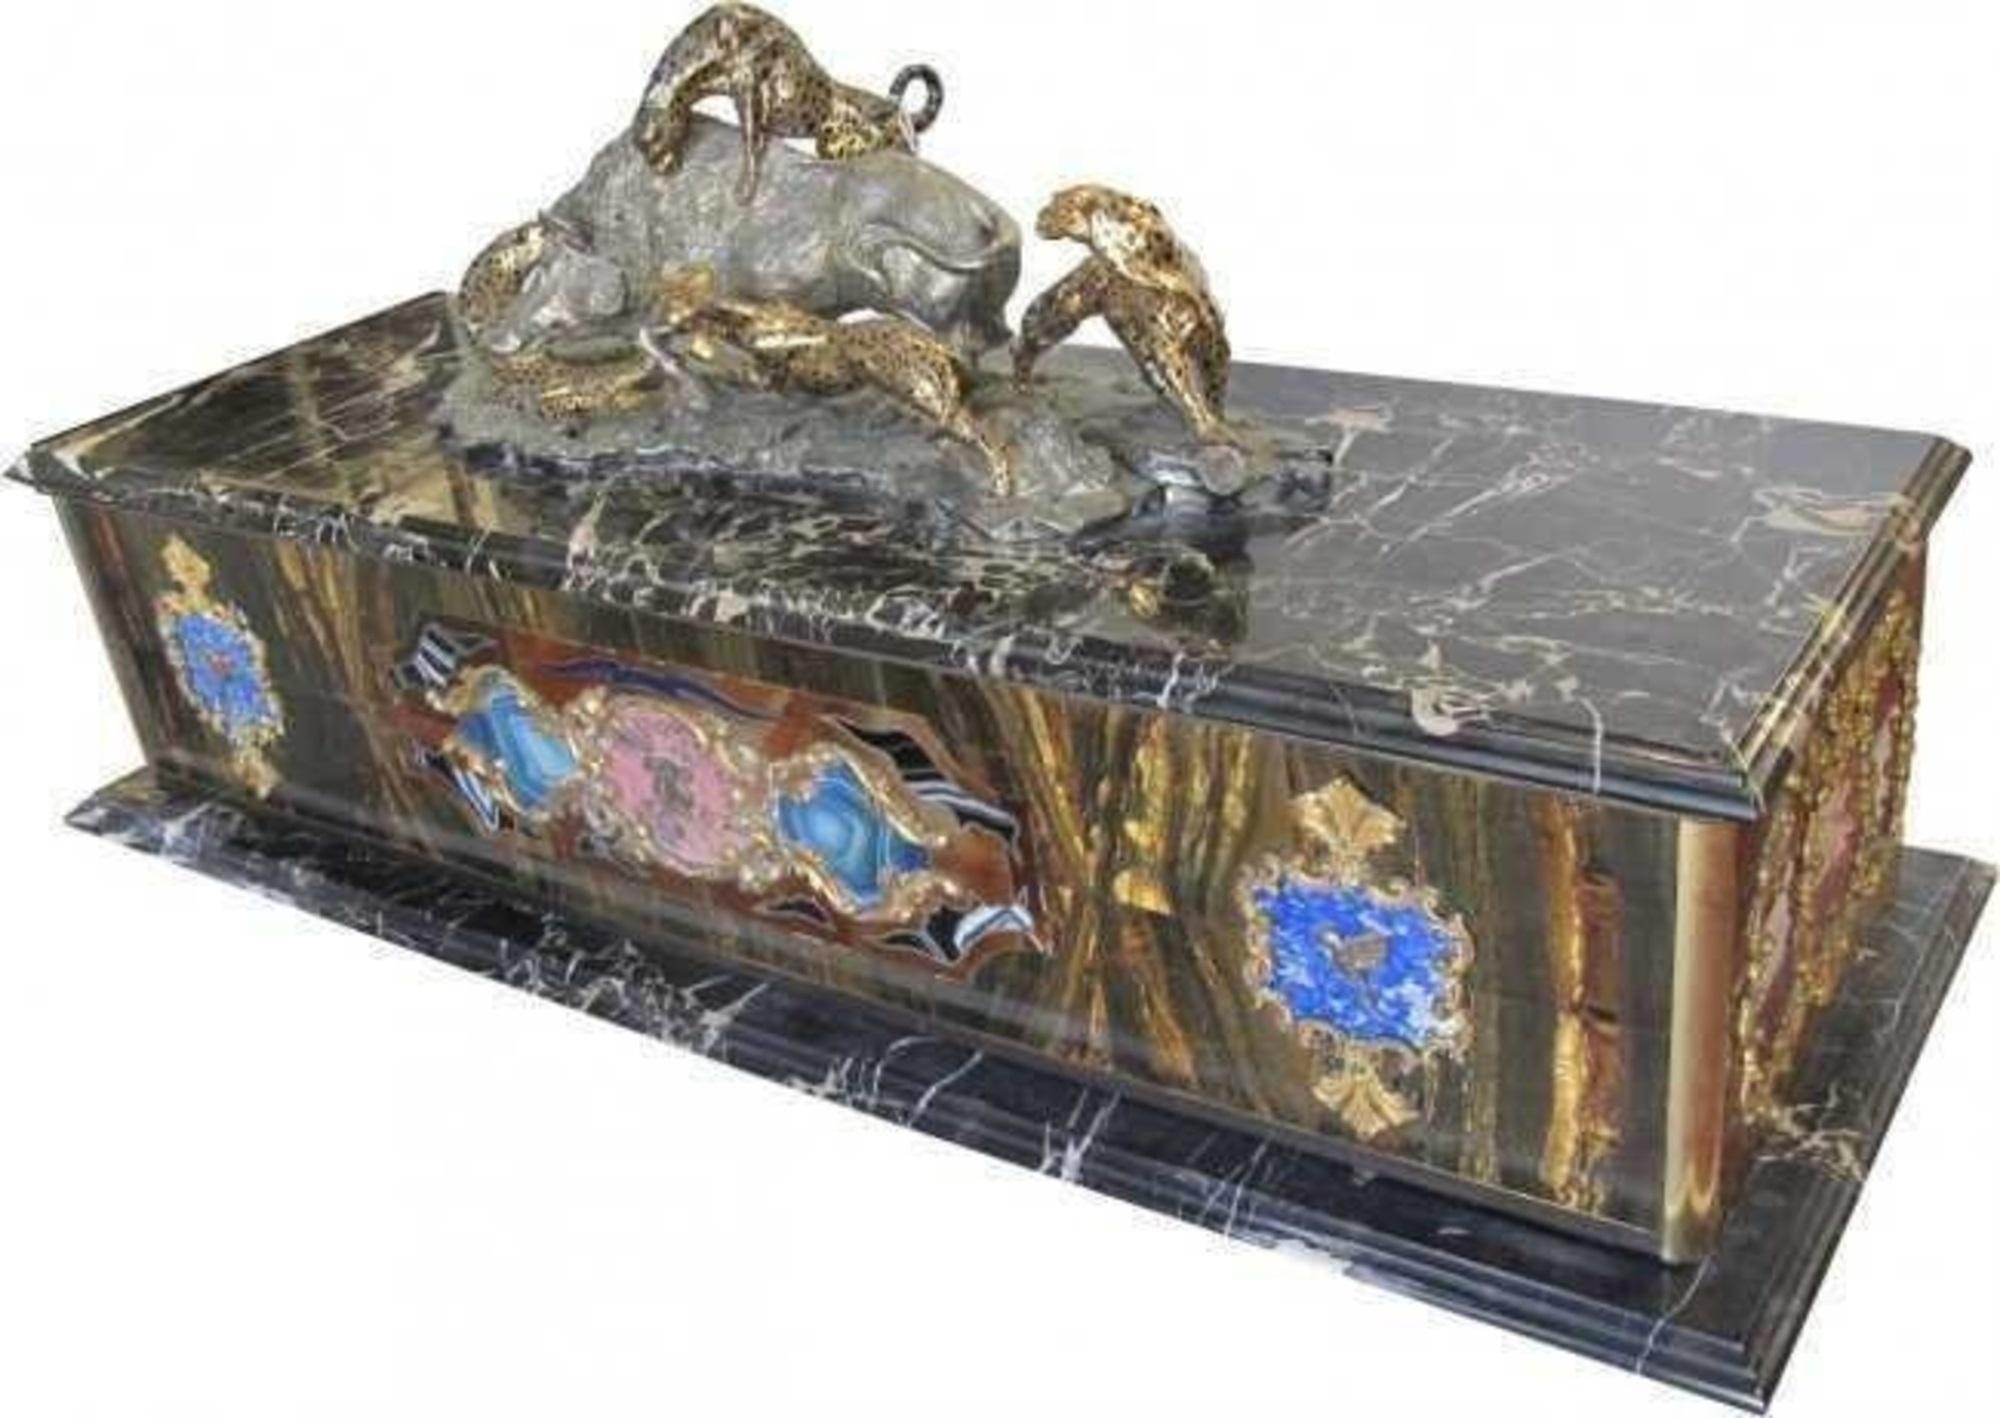 Unusual Swiss cylinder music box, marble and bronze case
probably Swiss, marble and silvered bronze case, the cylinder is interchangeable, but there is only one cylinder with it. The case with inset colored marbles, the top with three cheetah